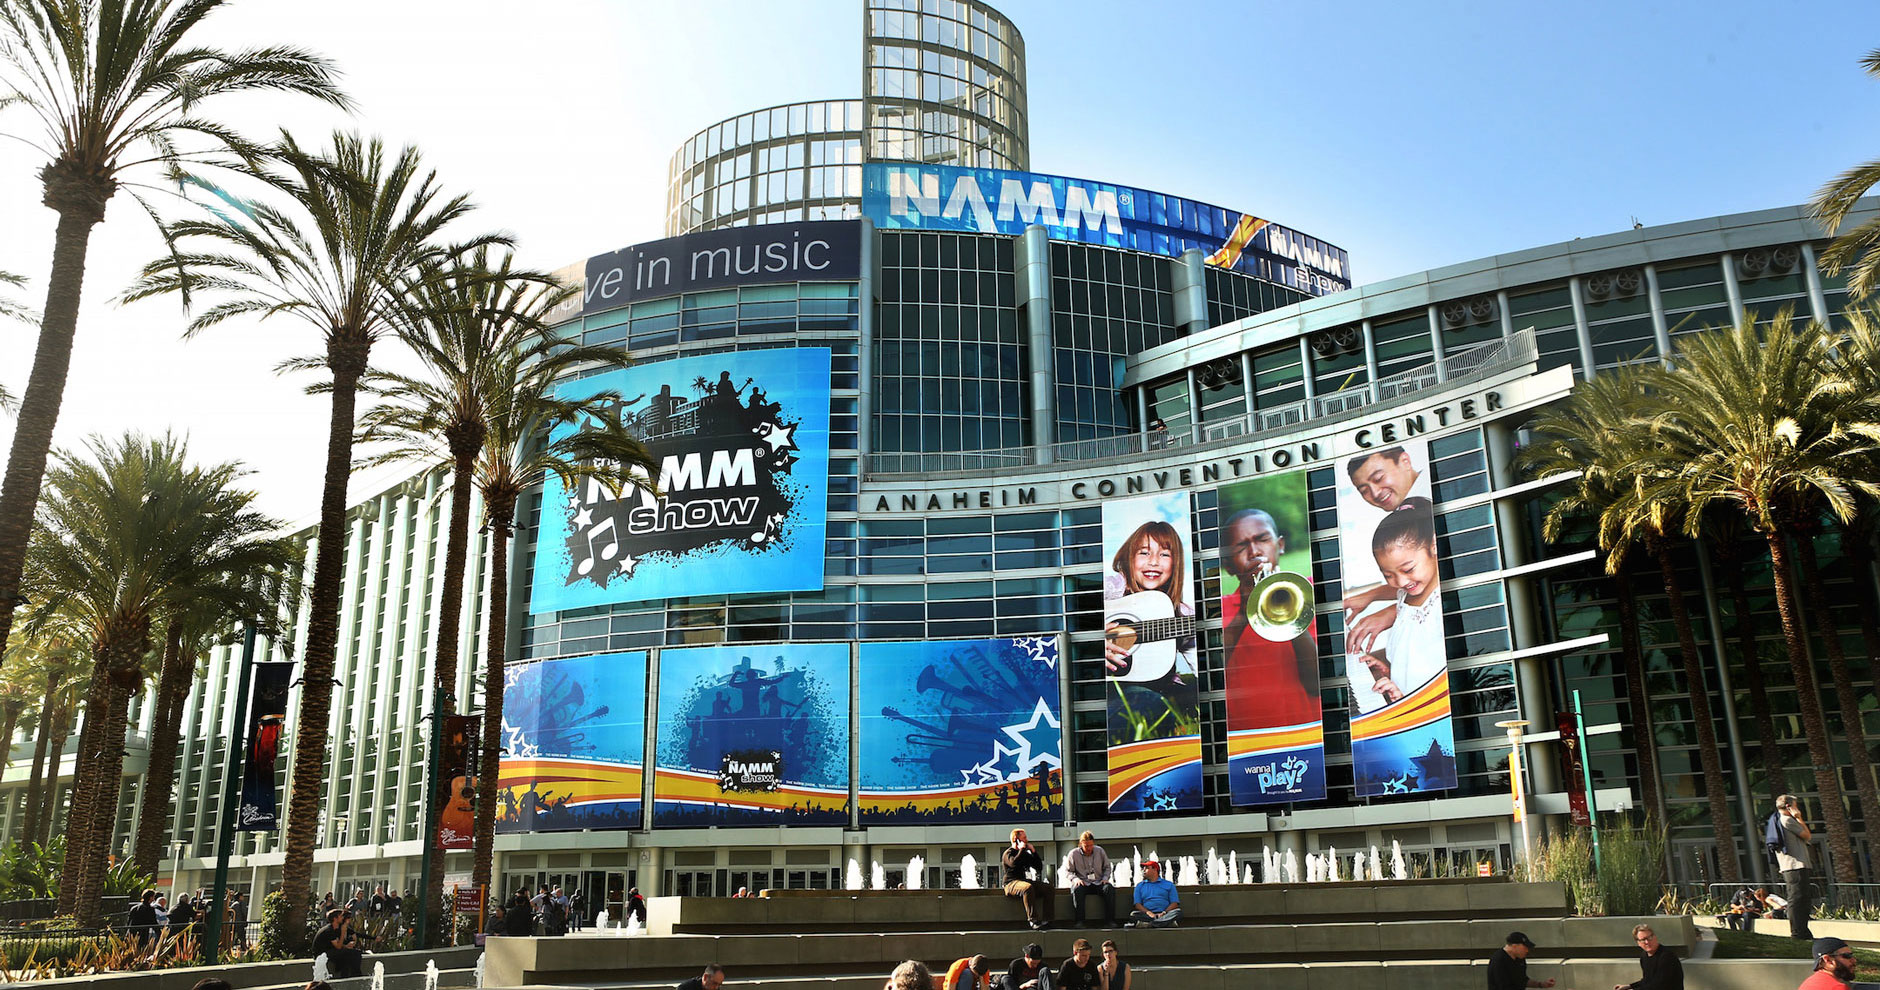 The NAMM Show 2019 Button